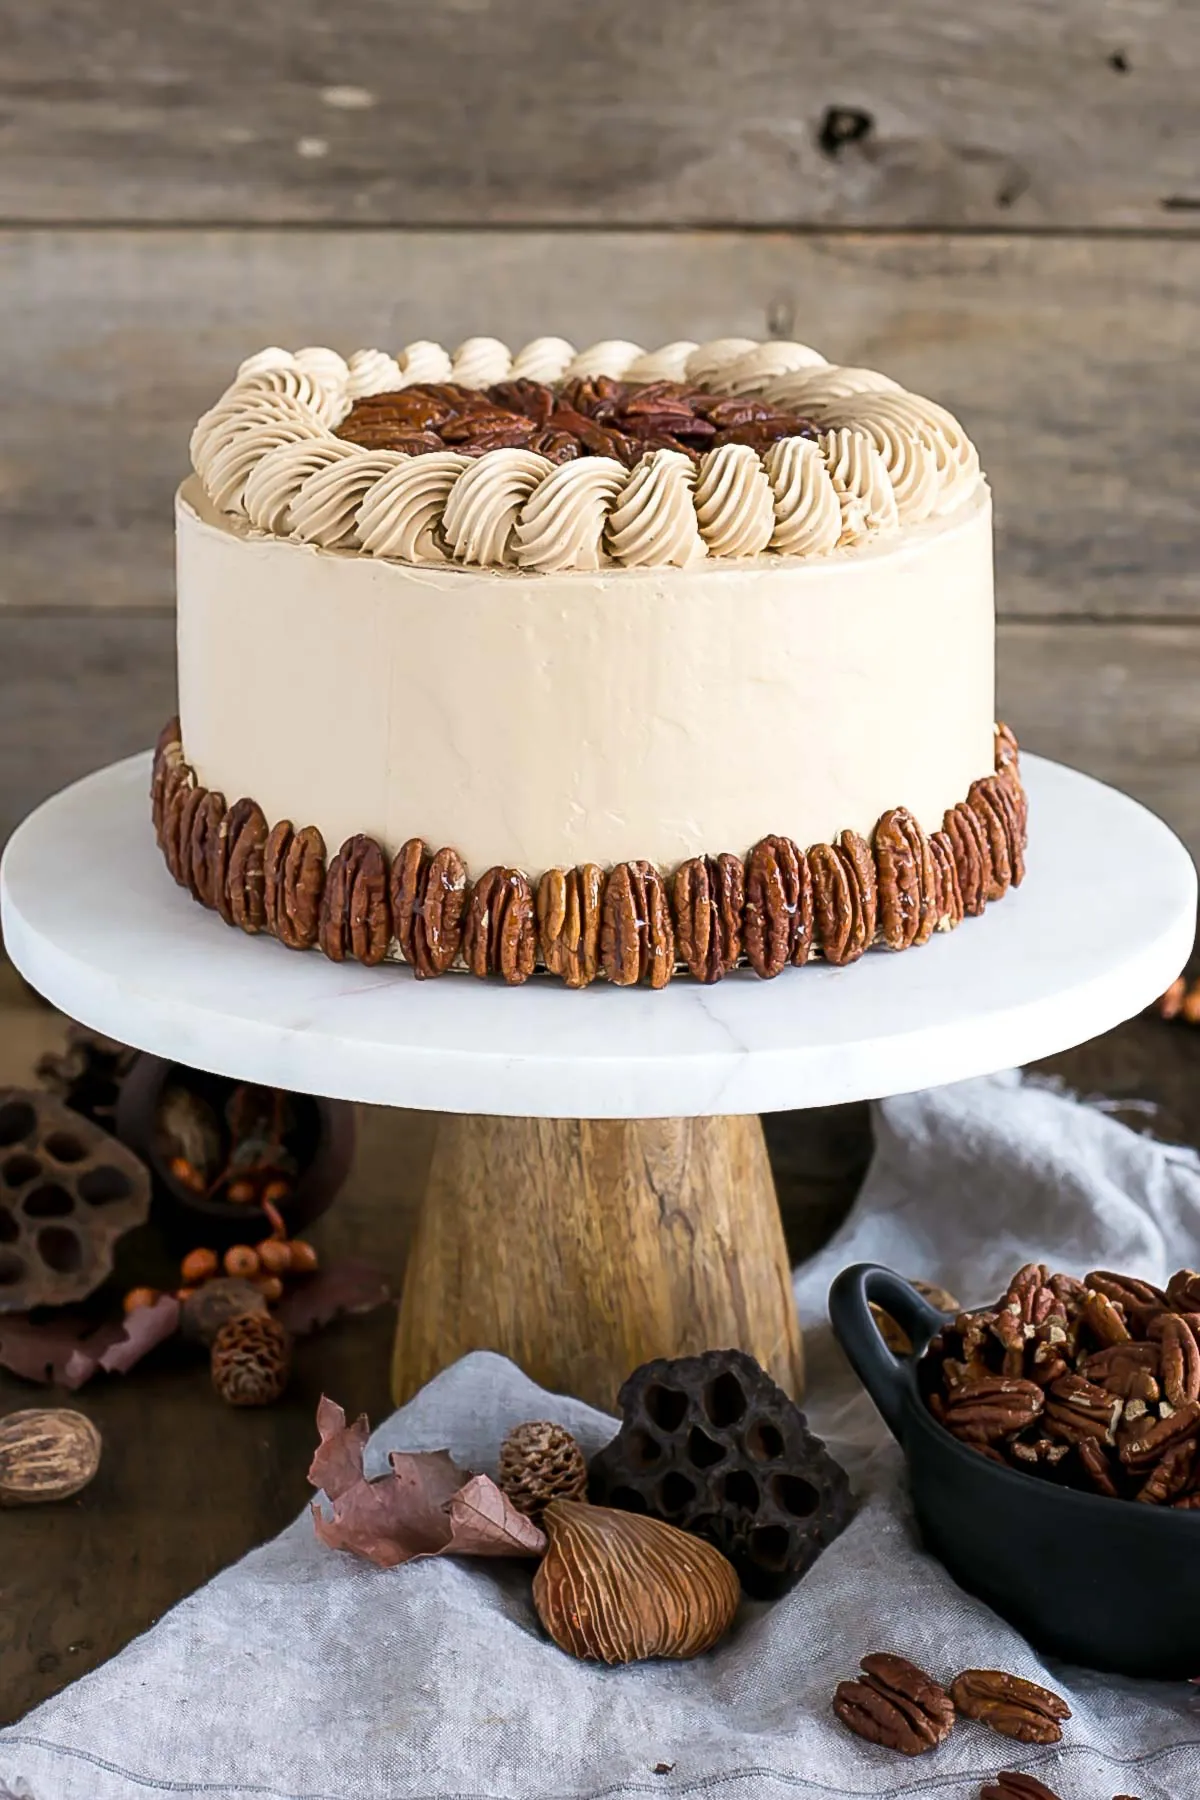 Cake decorated with pecans on a rustic cake stand.